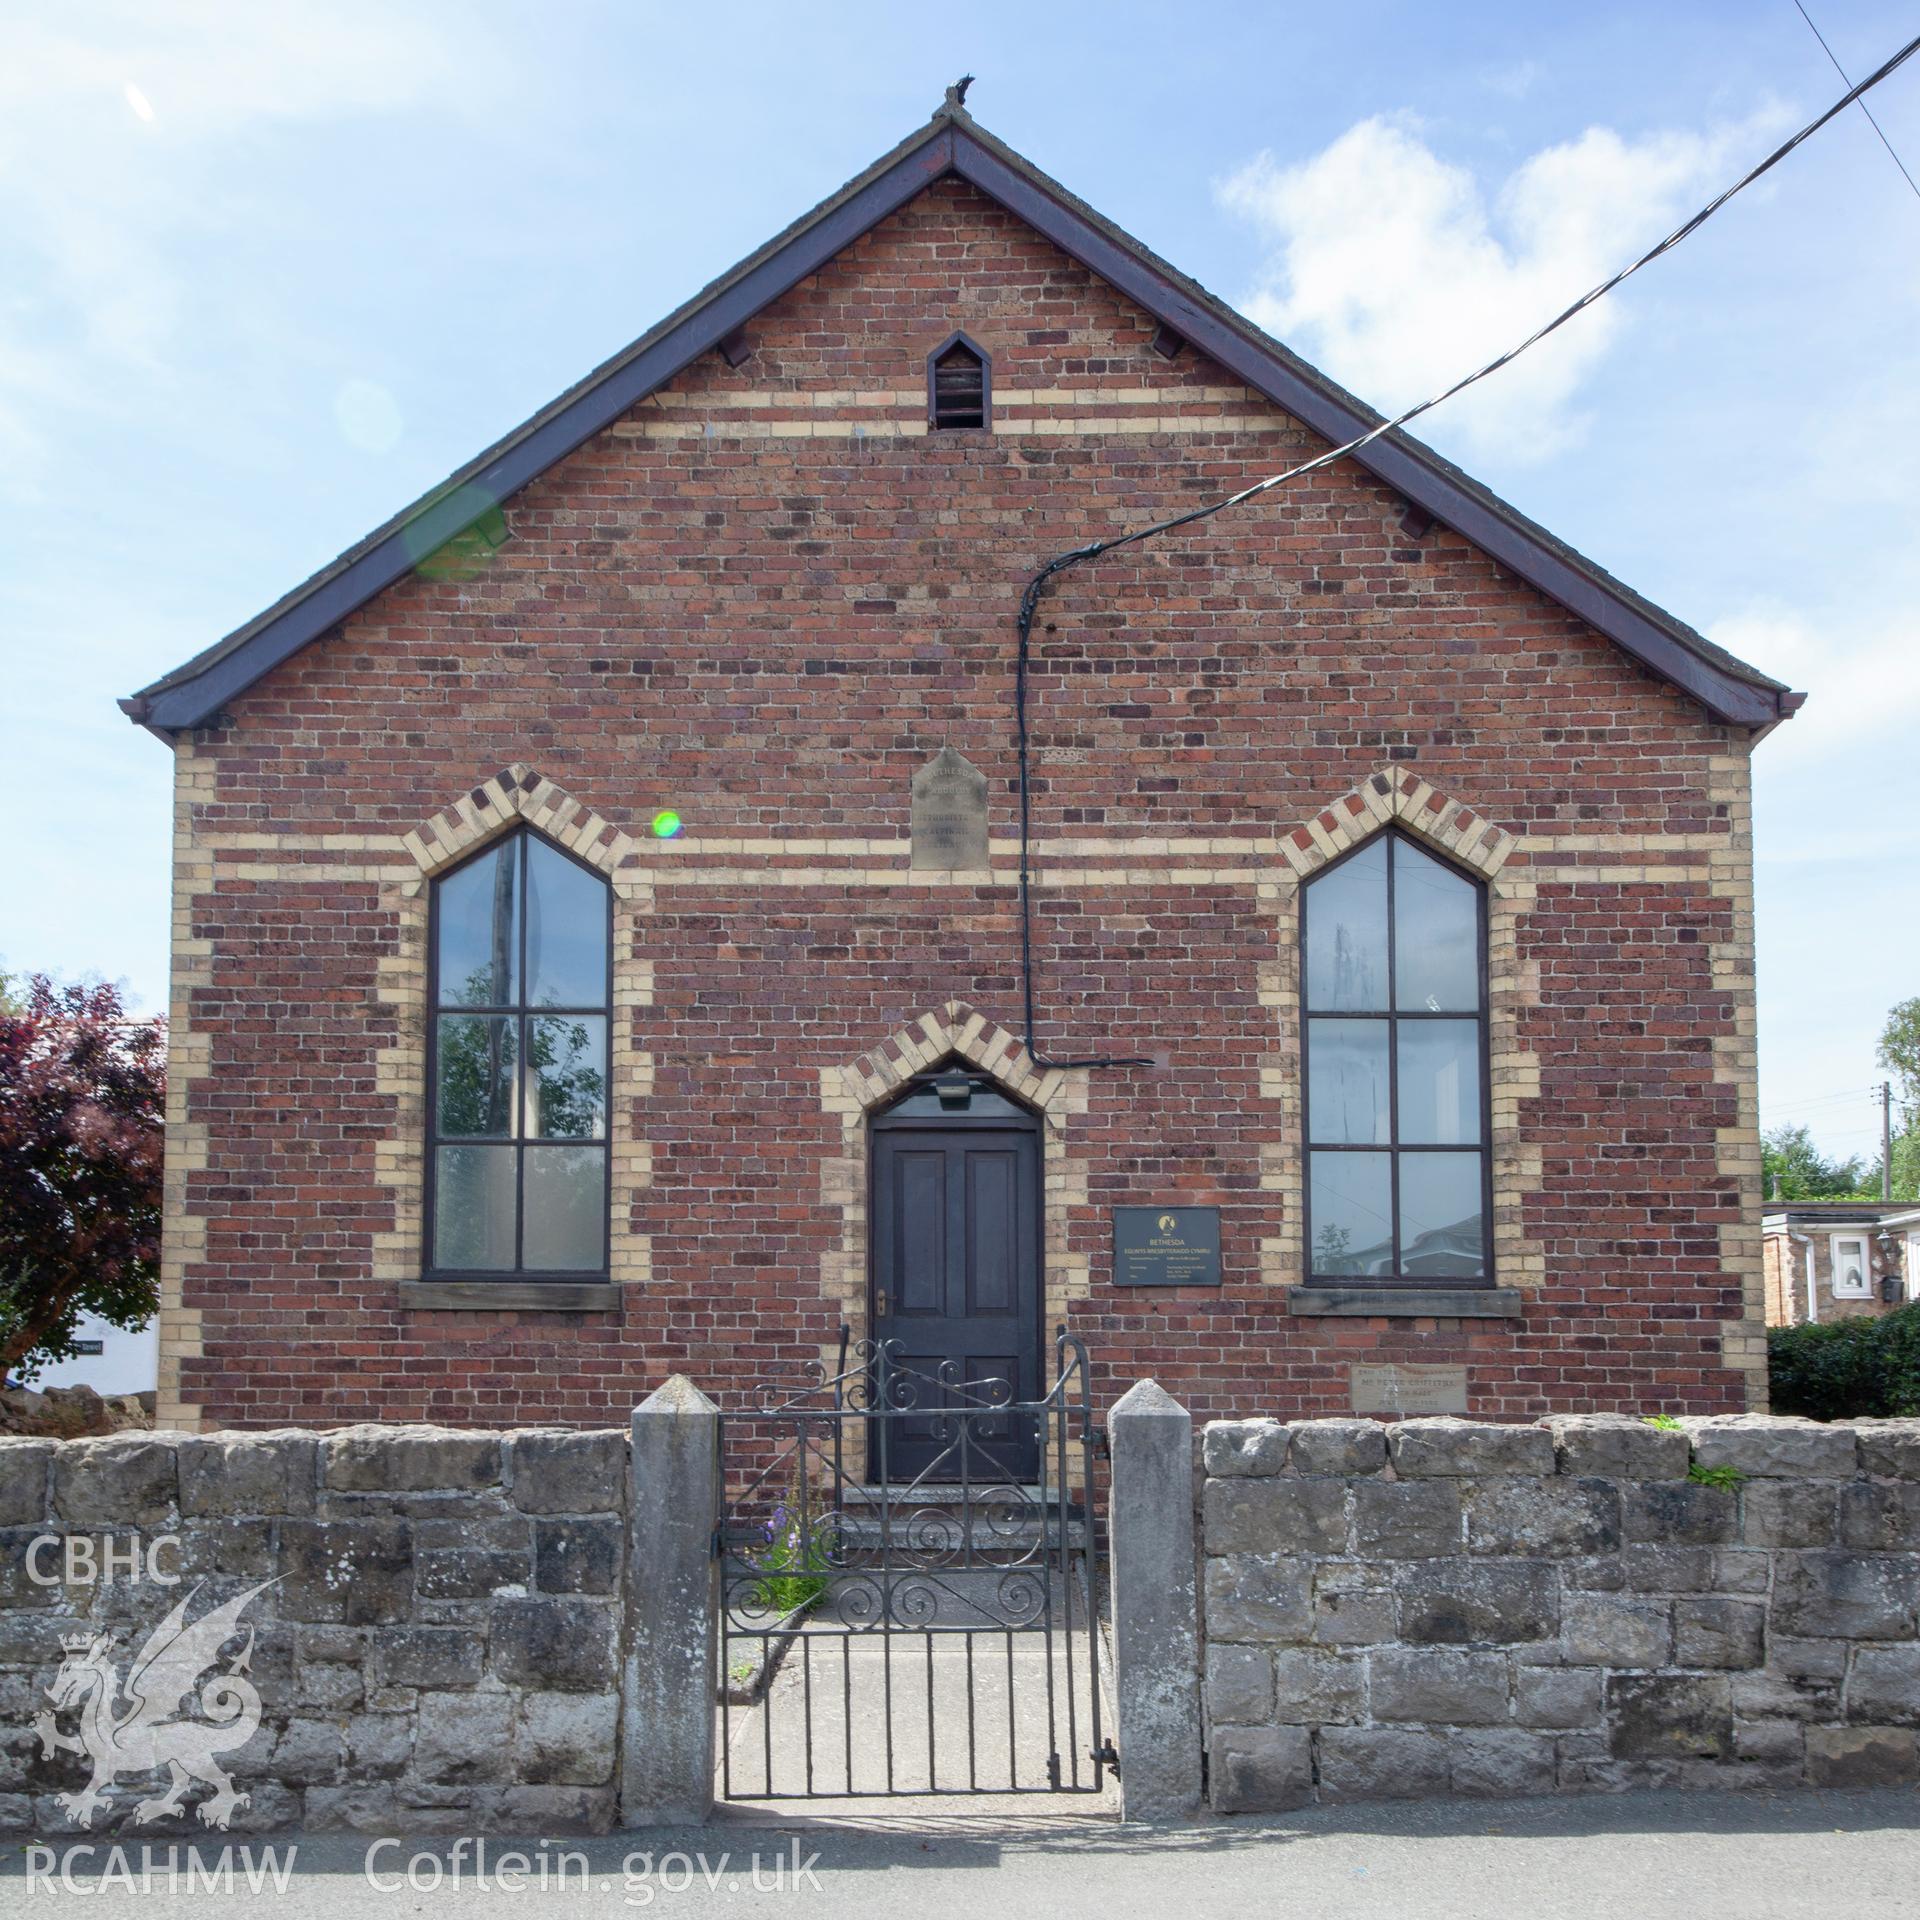 Colour photograph showing front elevation and entrance of Bethesda Calvinistic Methodist Chapel, Gwernaffield, Mold. Photographed by Richard Barrett on 4th August 2018.